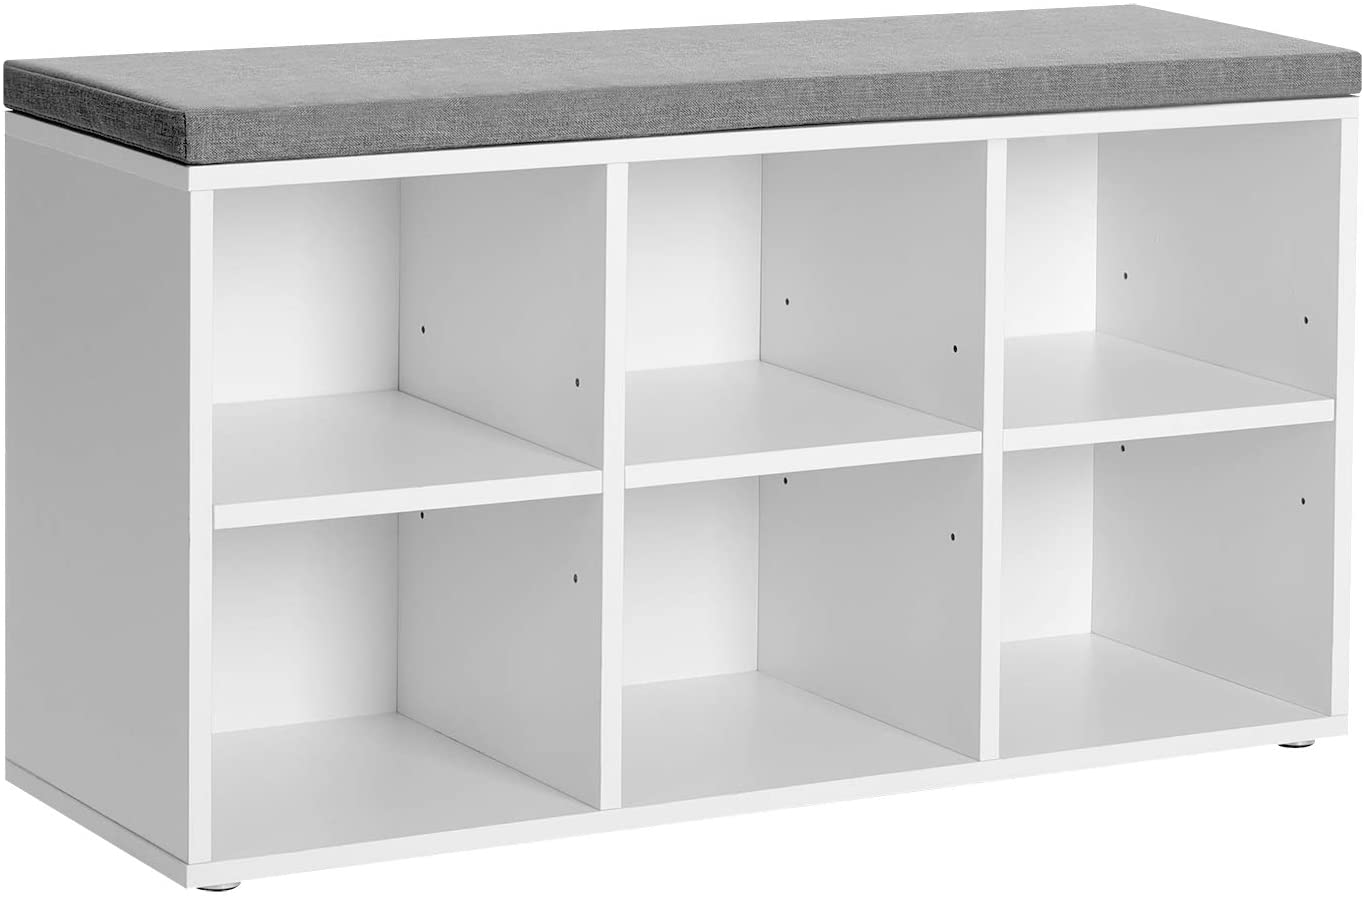 VASAGLE Shoe Bench with 6 Compartments and 3 Adjustable Shelves